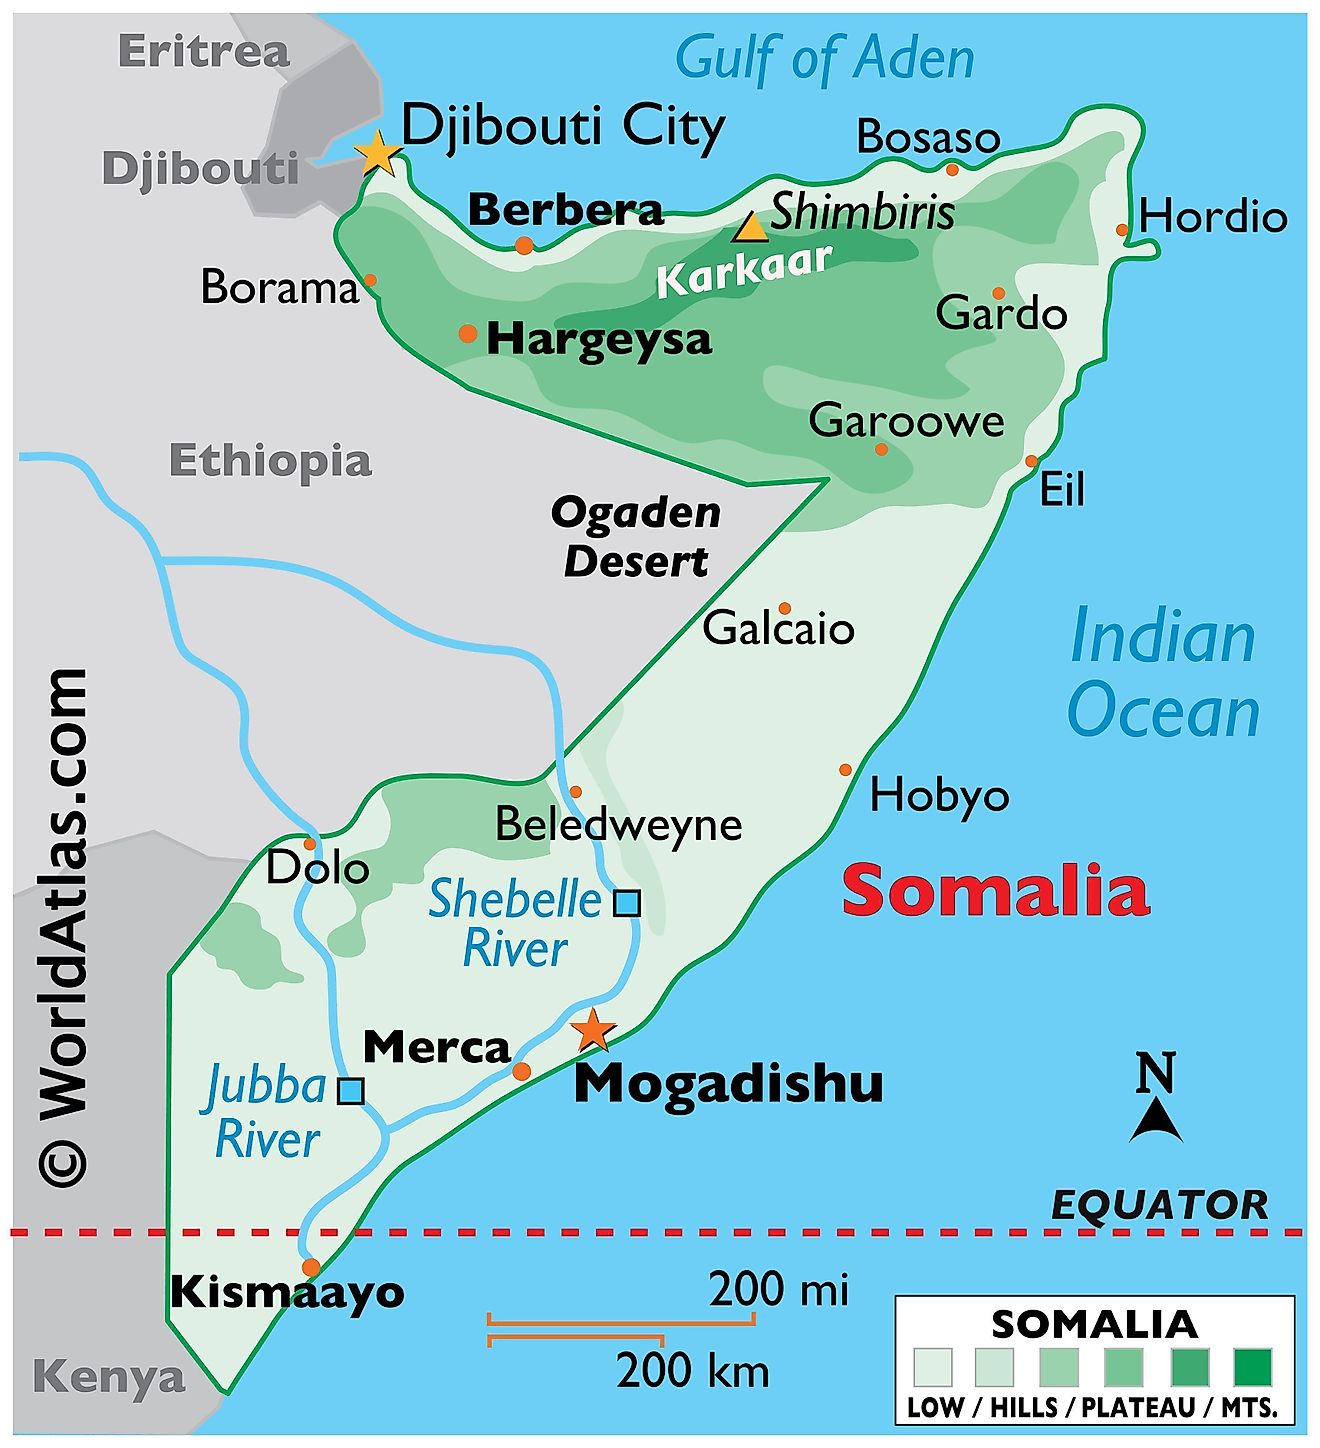 Phyiscal Map of Somalia with state boundaries. It shows the physical features of Somalia including terrain, mountain ranges, rivers, and major cities.